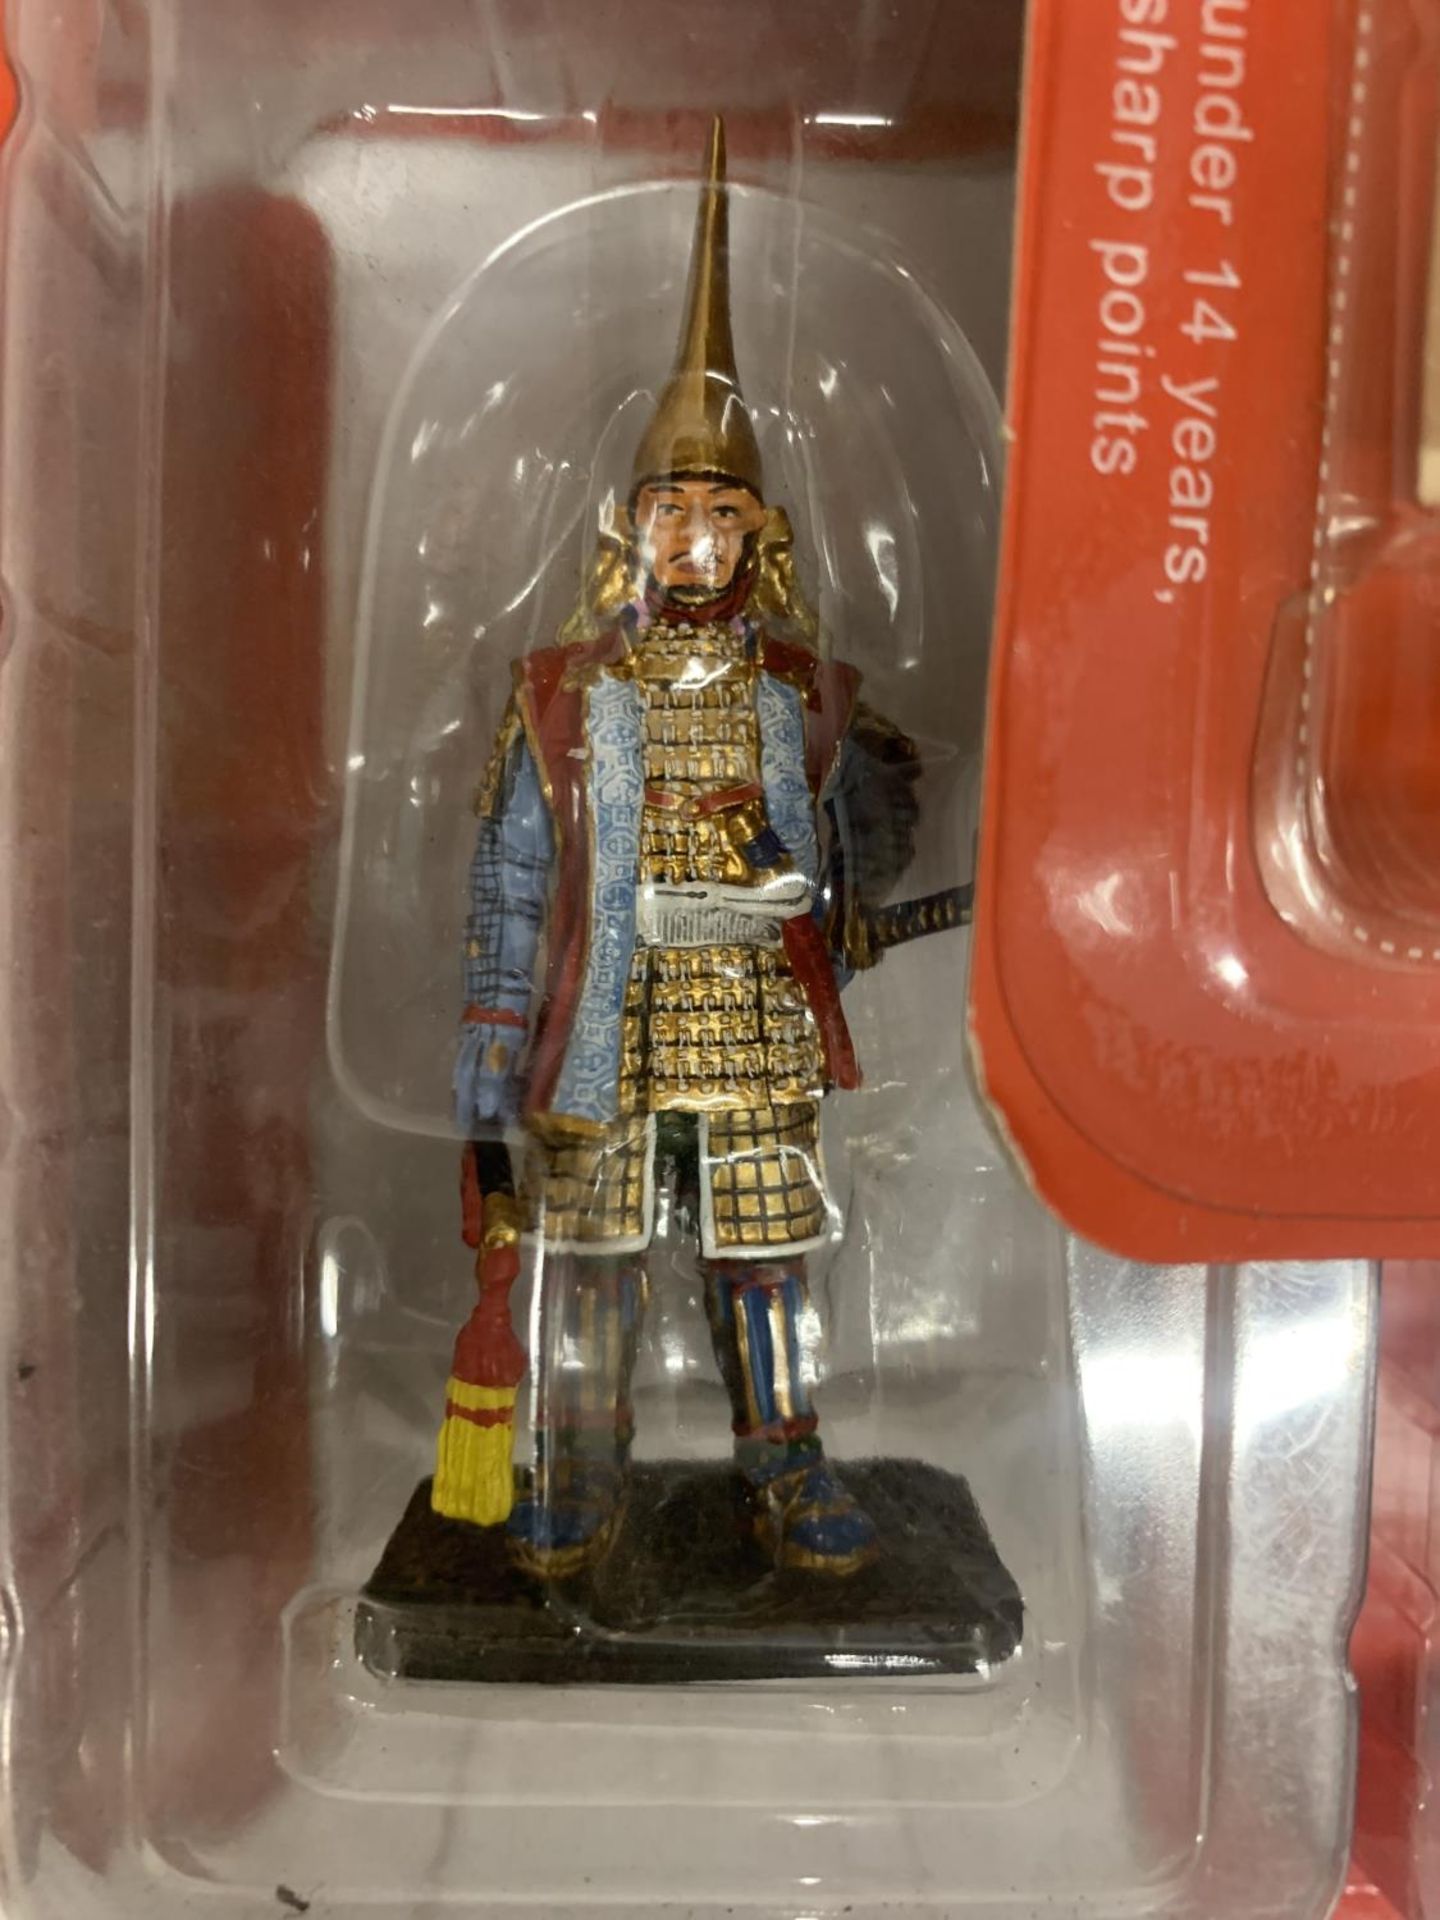 A LARGE COLLECTION OF DEL PRADO MILITARY FIGURES IN BLISTER PACKS - Image 5 of 8